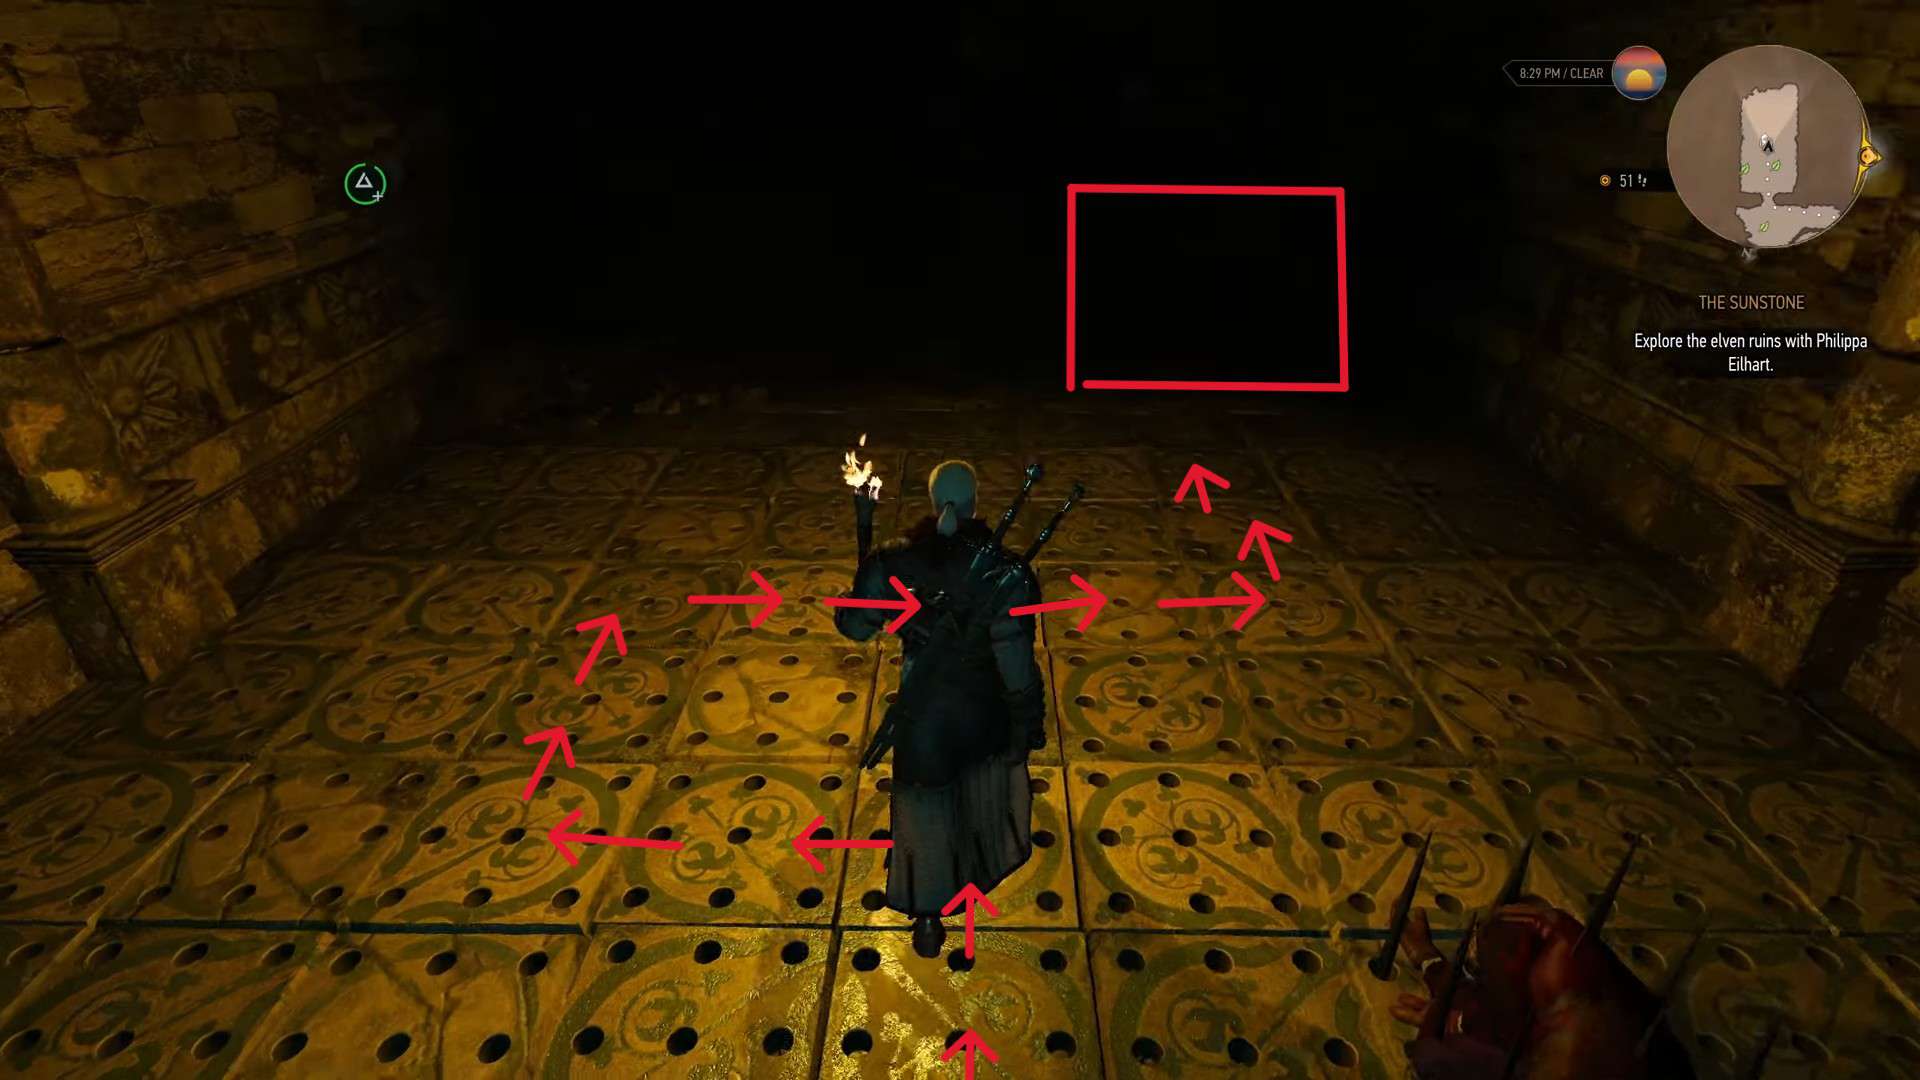 The Witcher 3 Sunstone spike trap puzzle